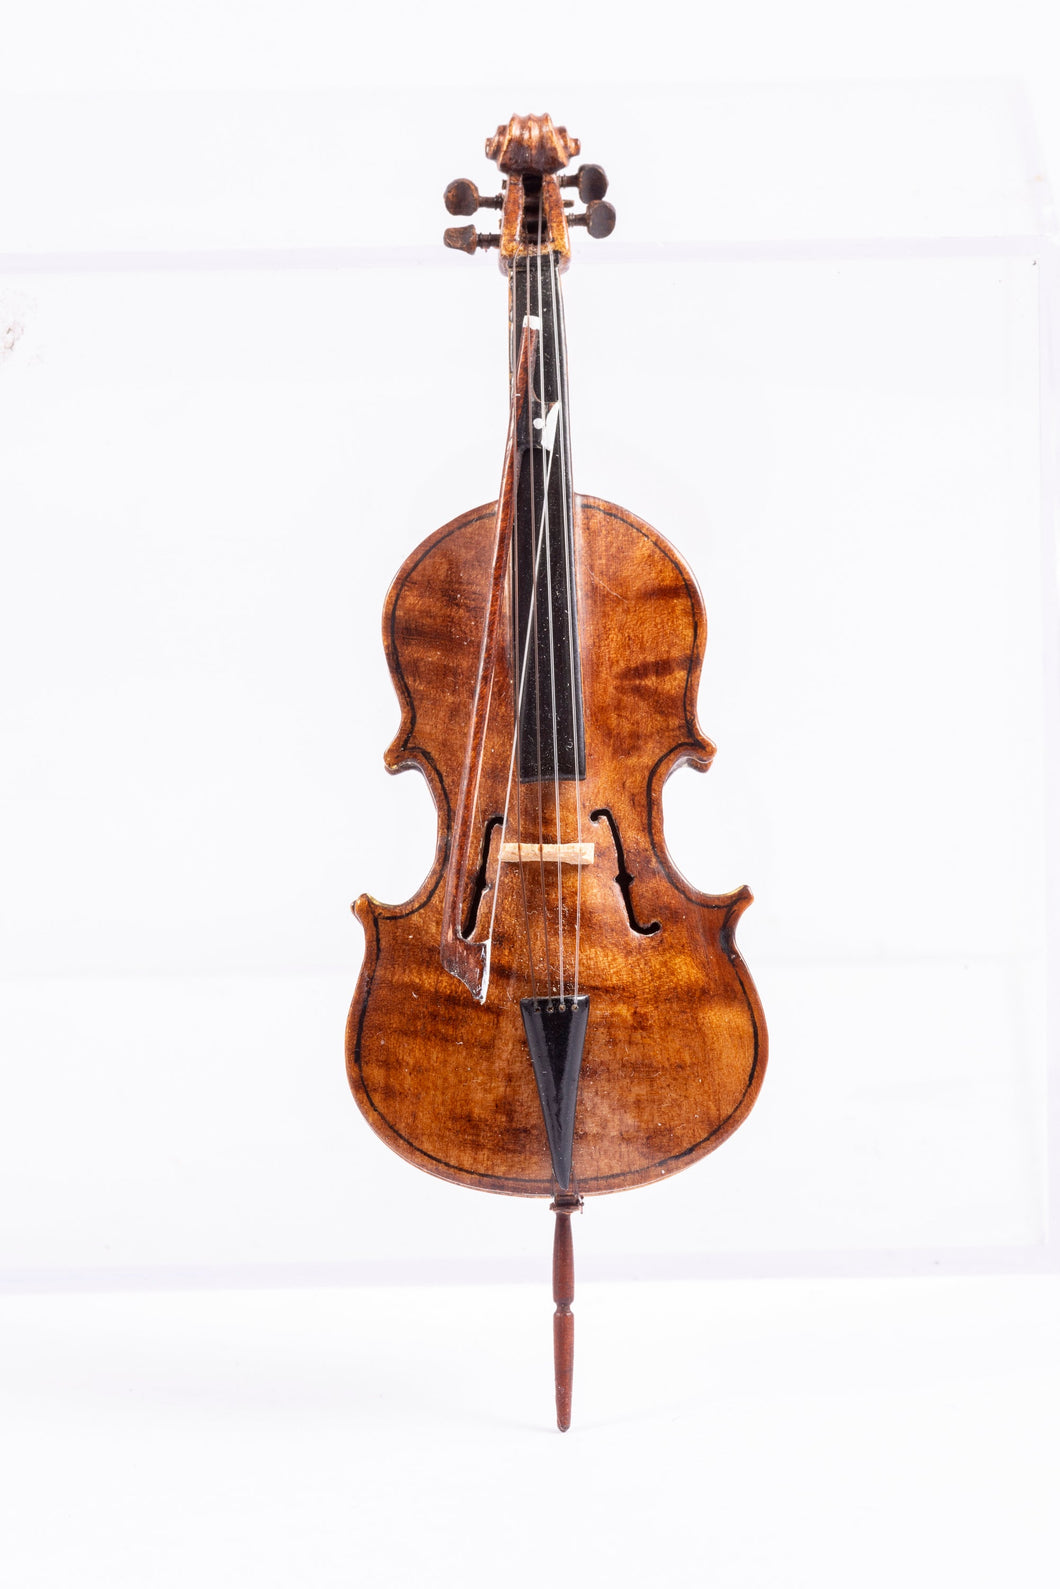 Dollhouse Miniature ~ Ken Manning Beautiful Cello & Bow - From Lee Lefkowitz Collection